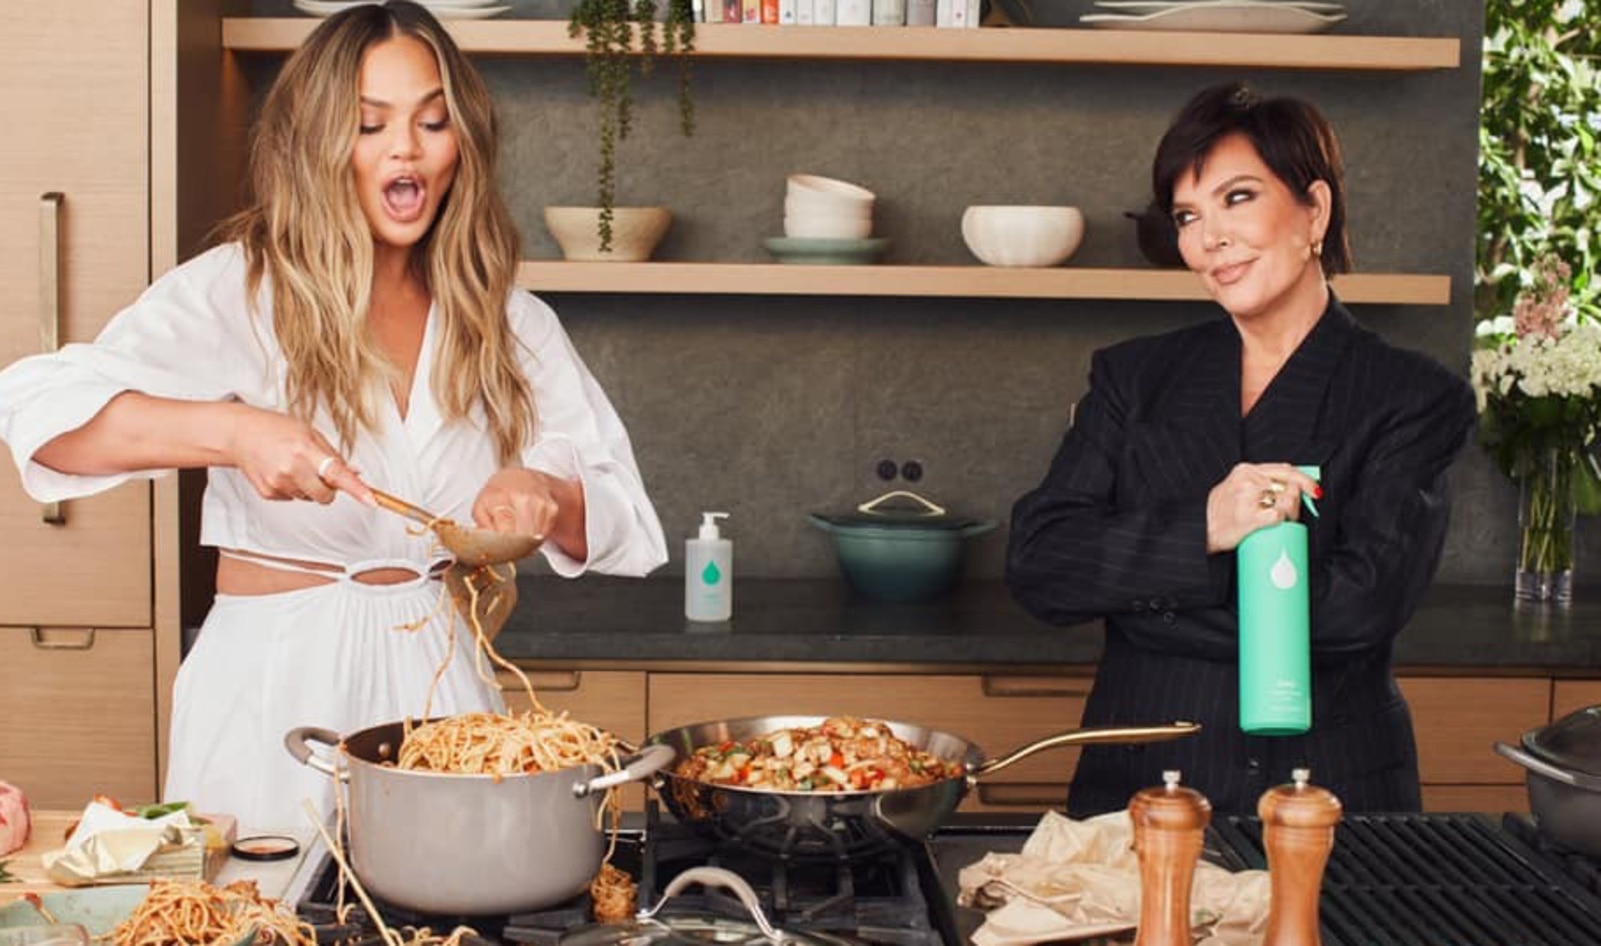 Chrissy Teigen and Kris Jenner Team Up On Cruelty-Free, Safe Cleaning Products